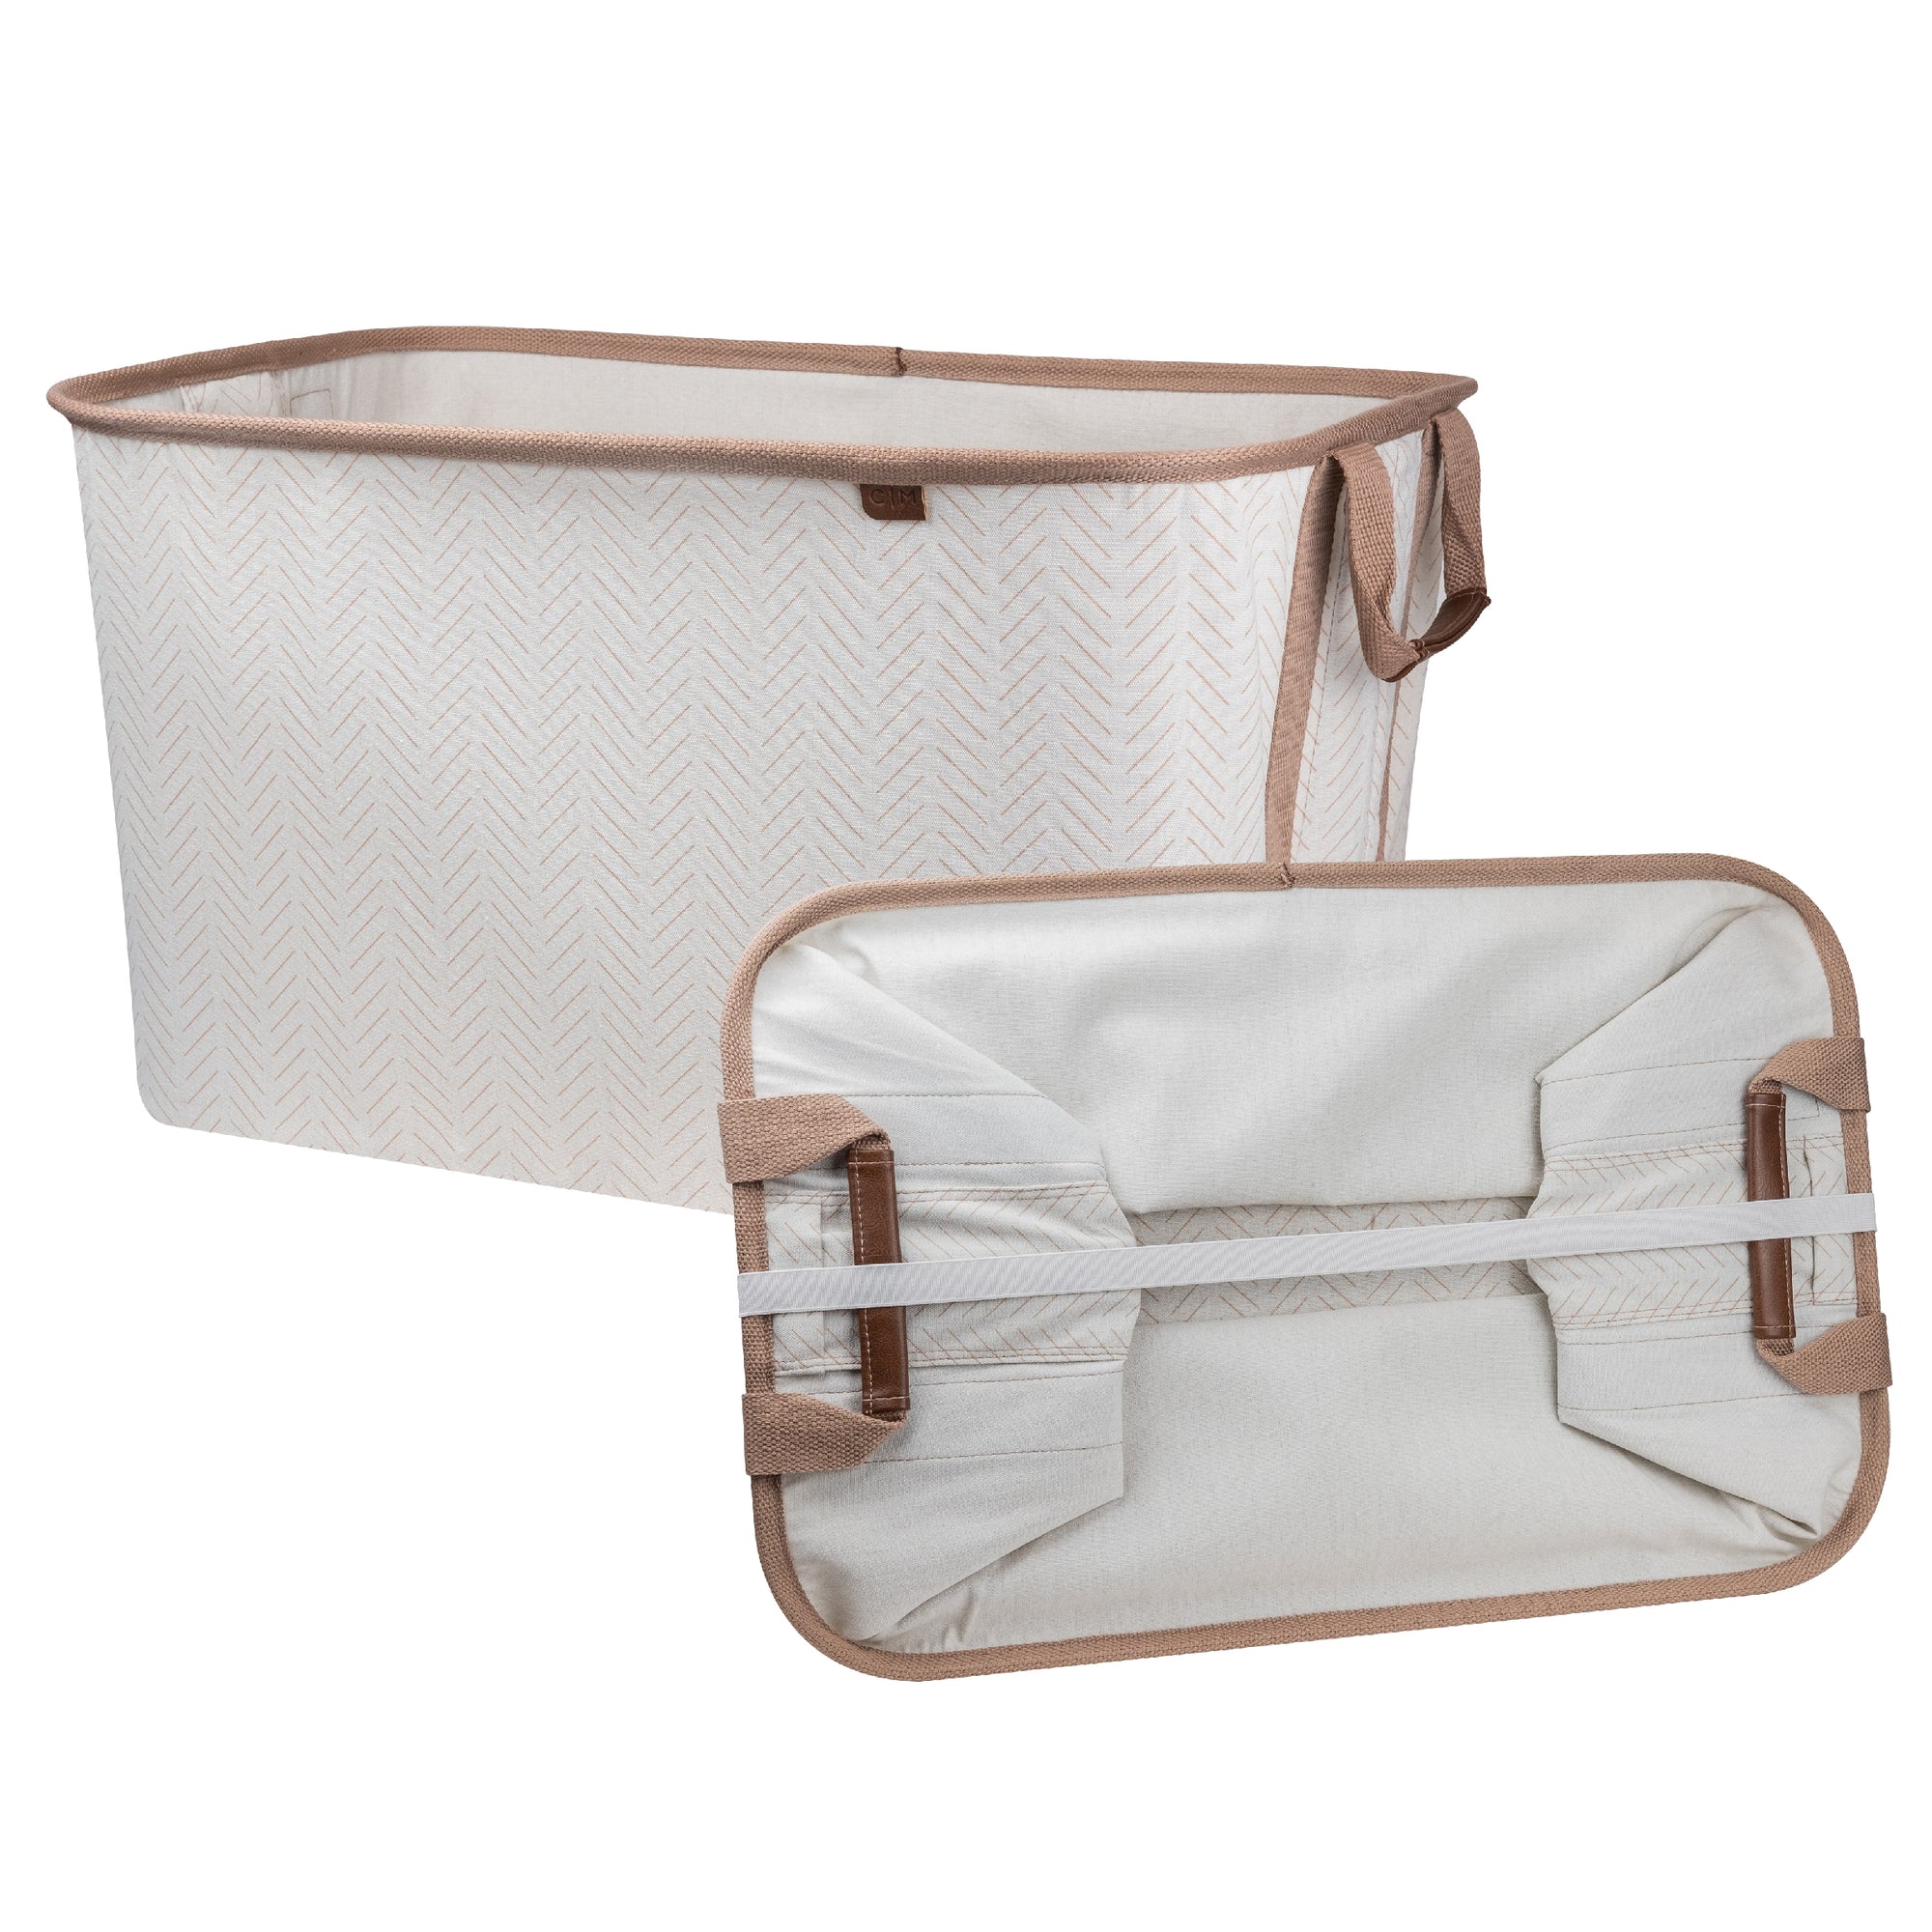 Clevermade XL Collapsible Laundry Tote 2-Pack